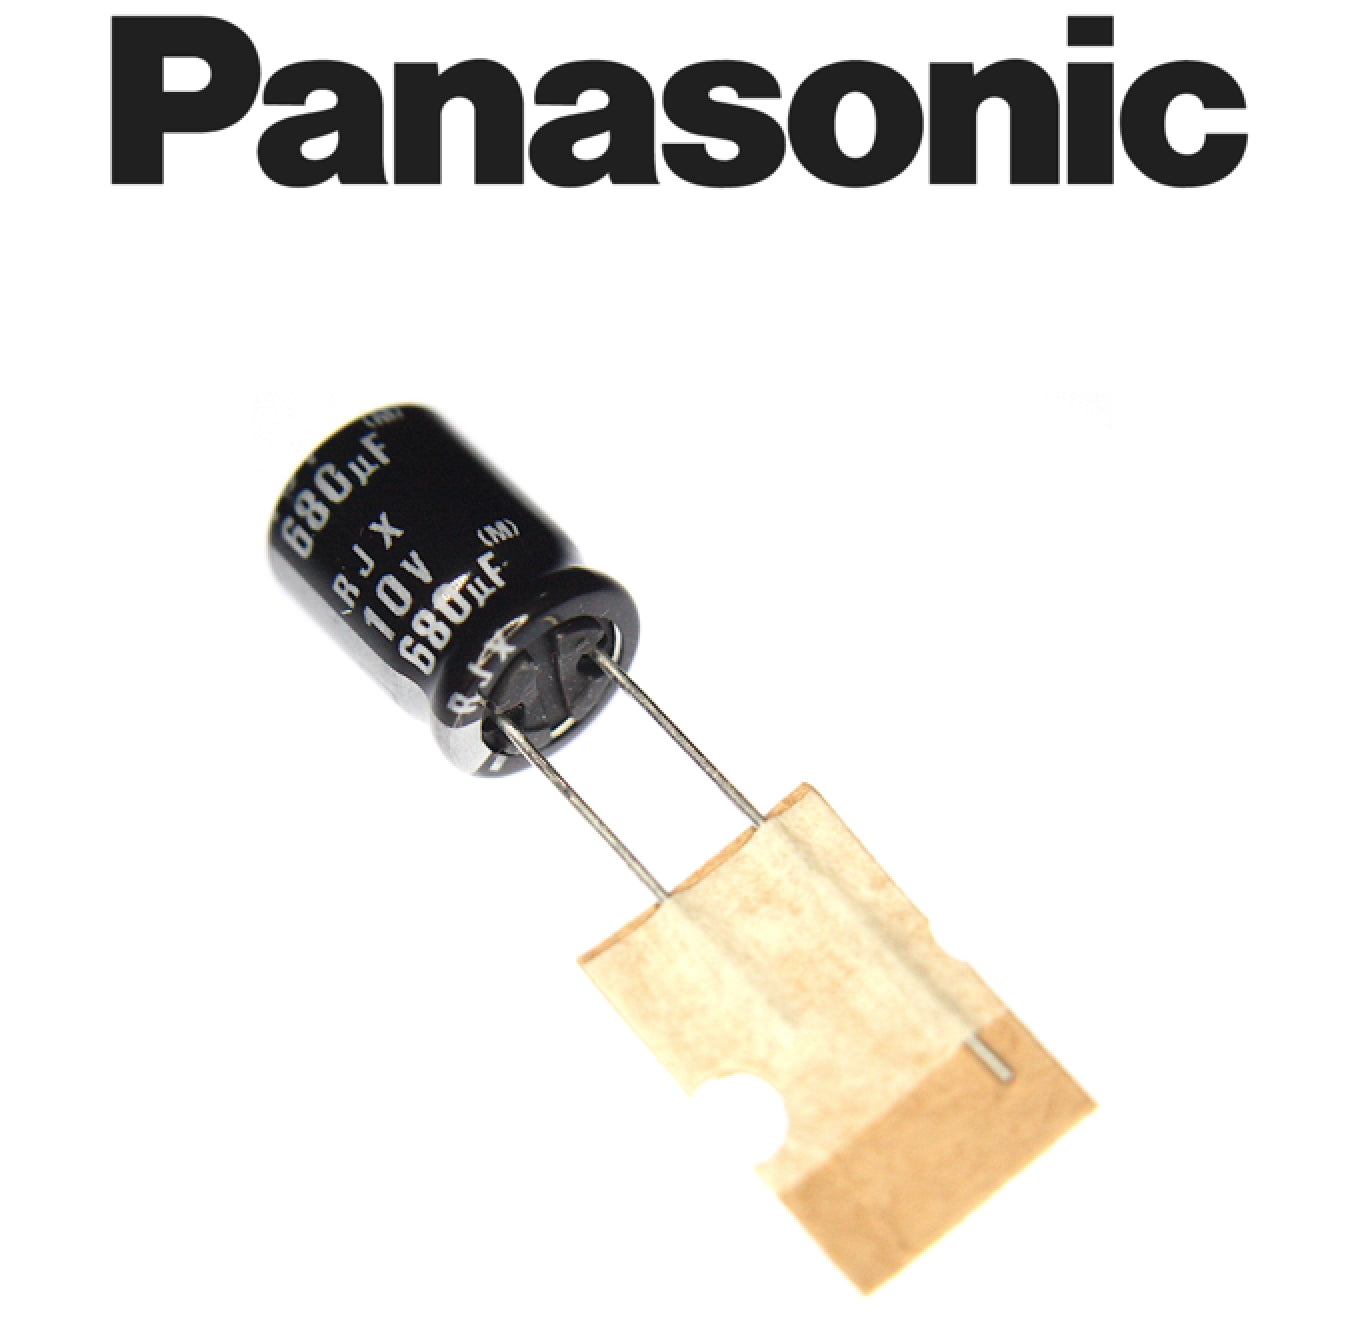 Panasonic Electrolytic Capacitor 680uF 10V (F2A1A681A540)